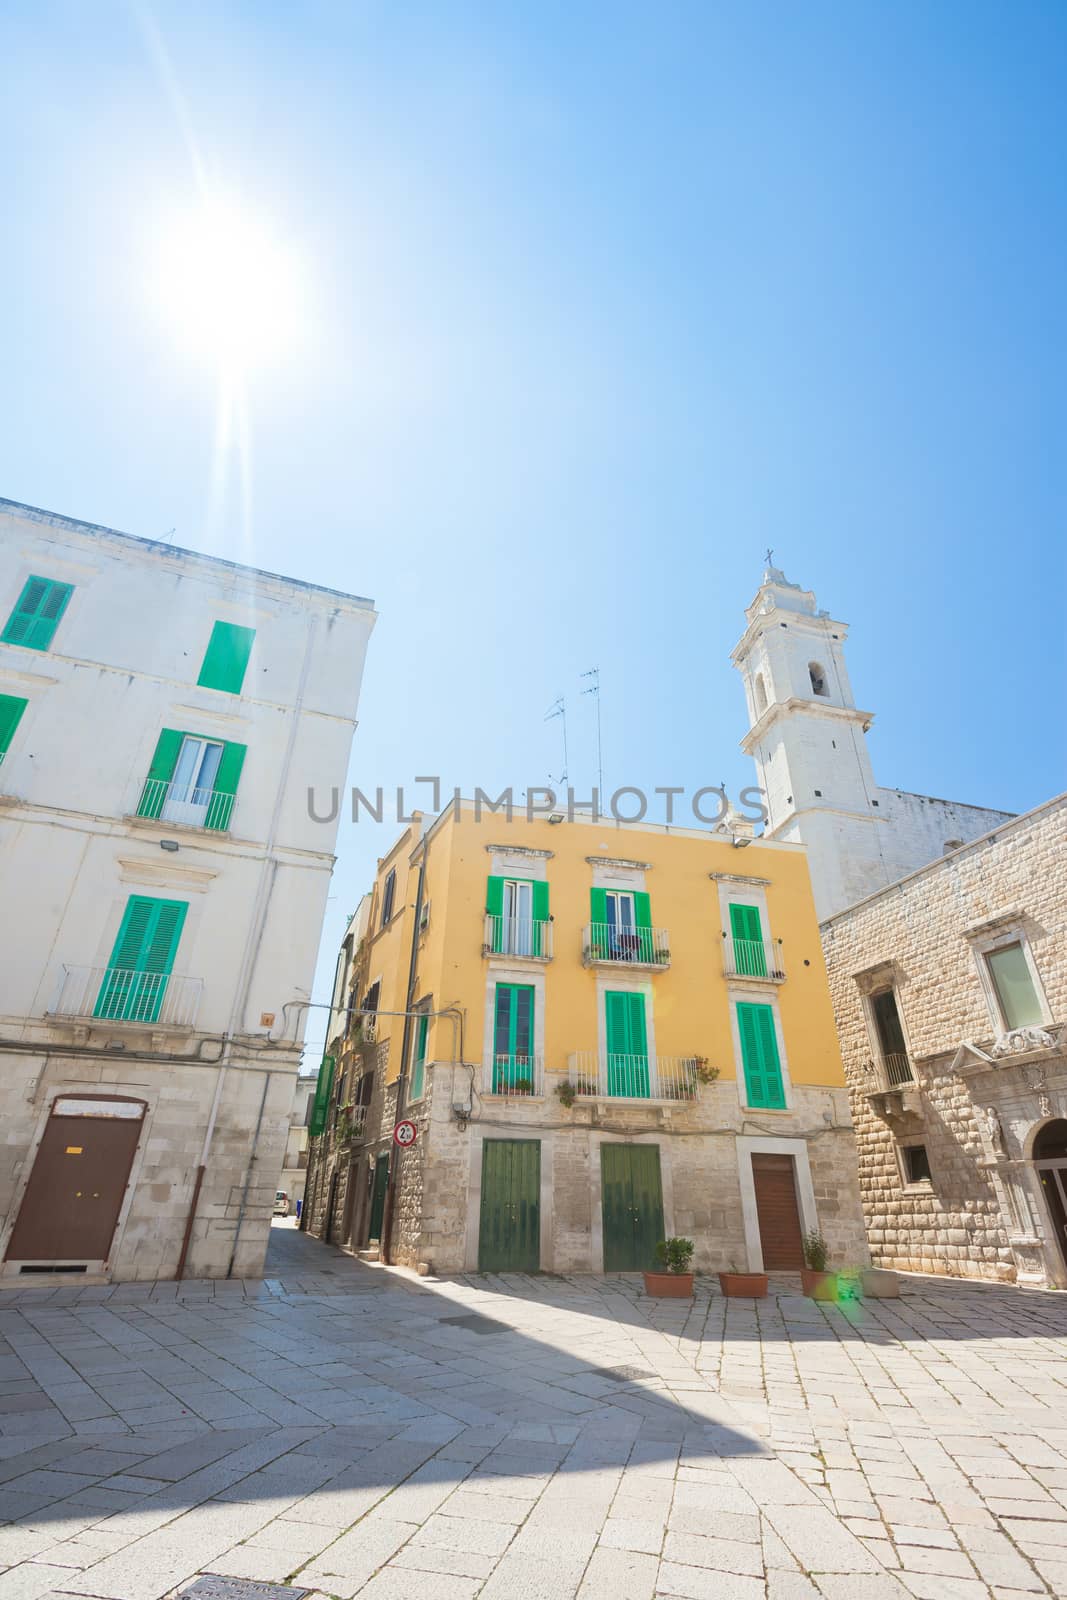 Molfetta, Apulia - Sunshine in the historical alleyways of Molfe by tagstiles.com